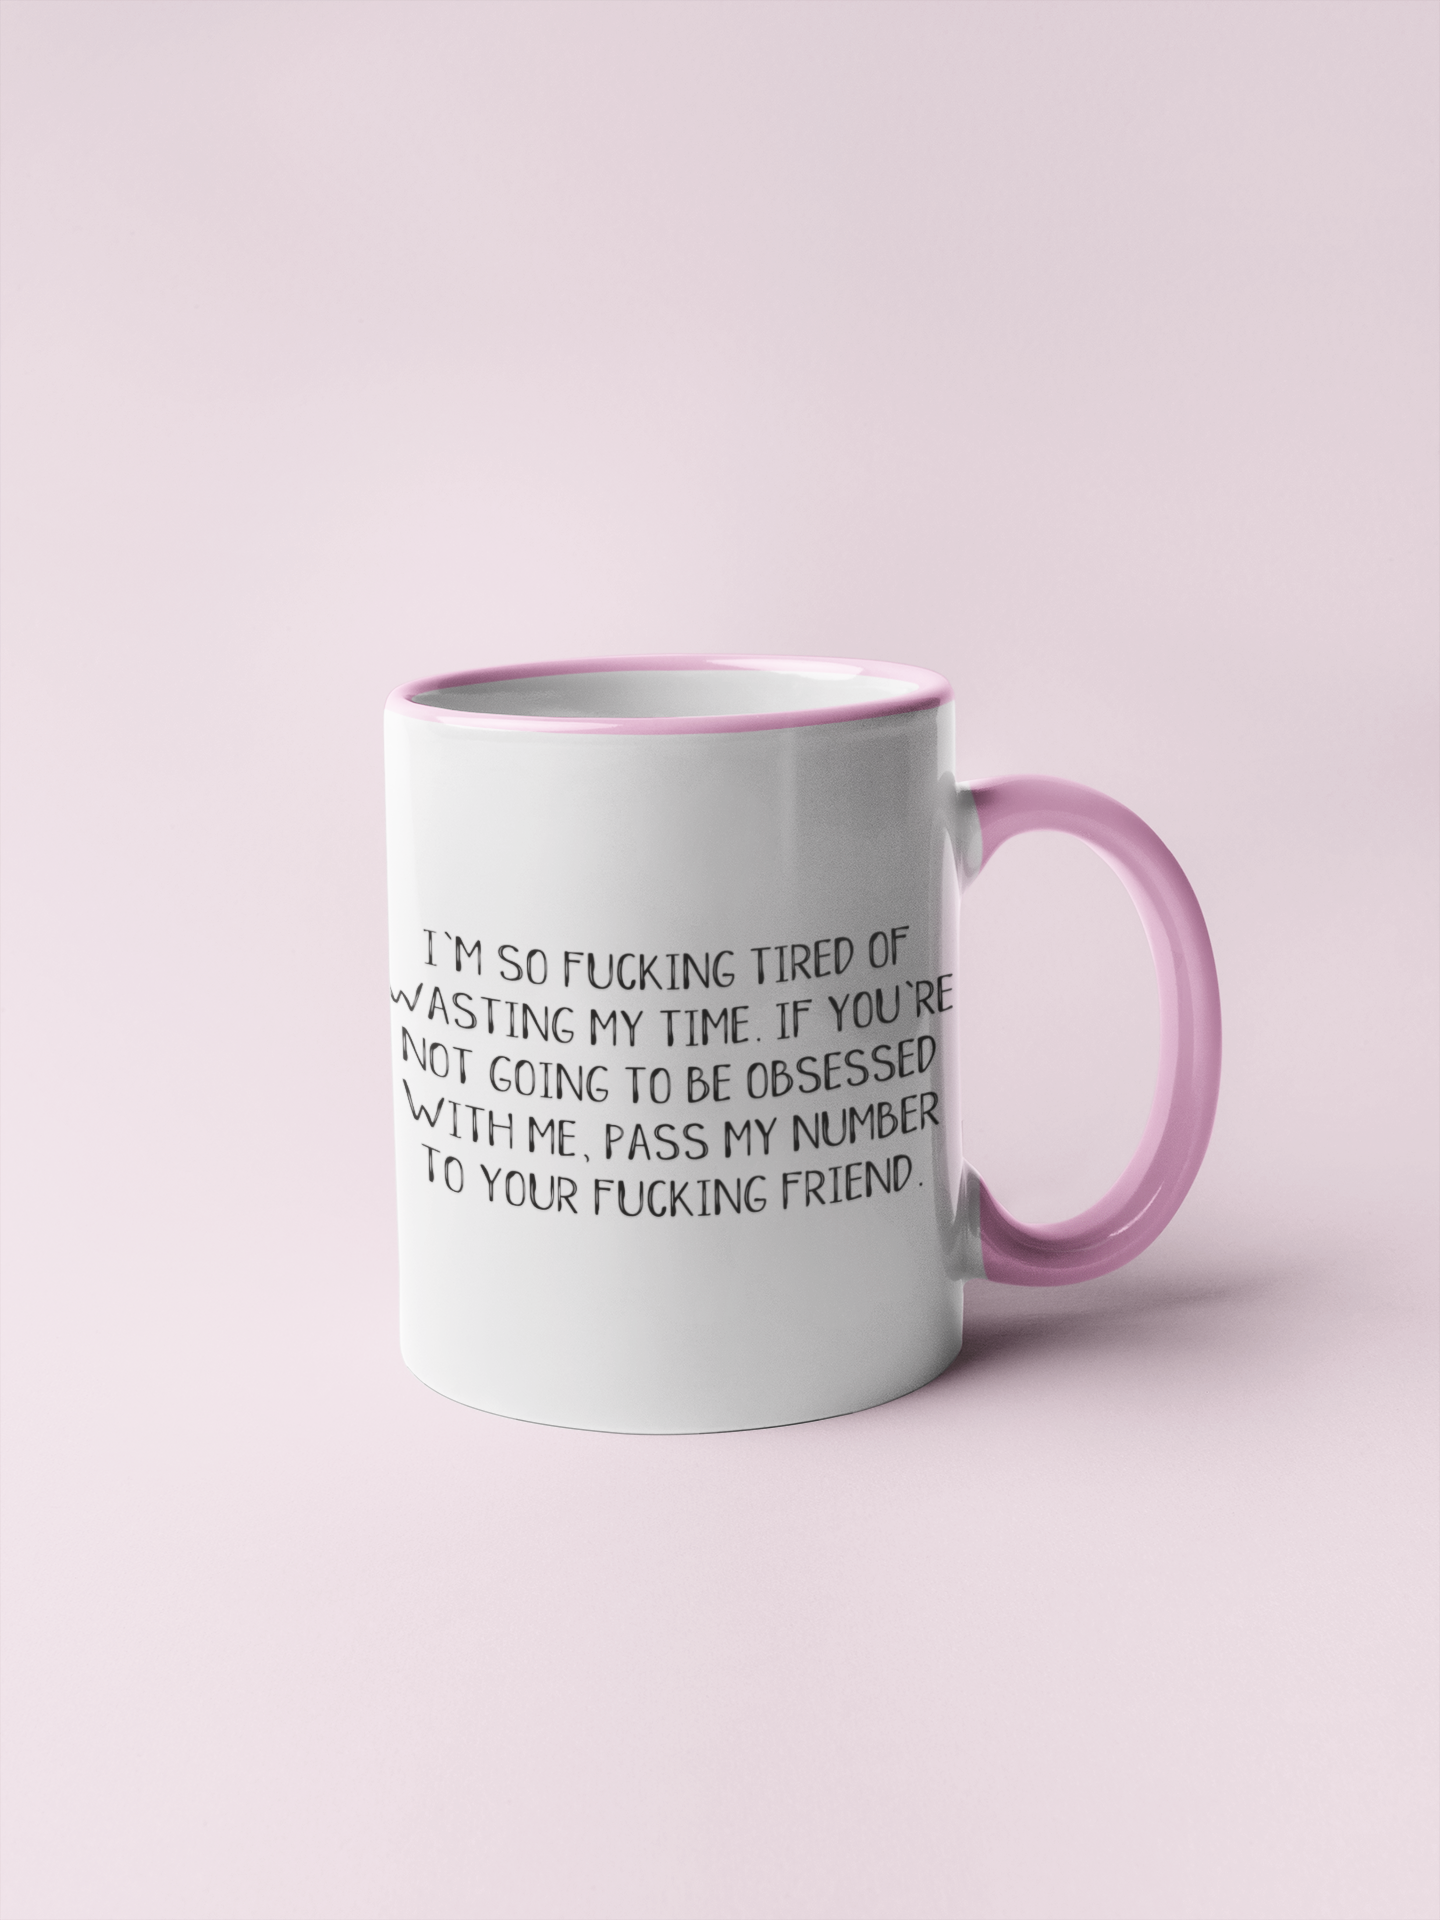 White ceramic mug with a pink rim & handle. Featuring the funny quote 'i'm so fucking tired of wasting my time. If you're not going to be obsessed with me, pass my number to your friend'. Printed in black ink.